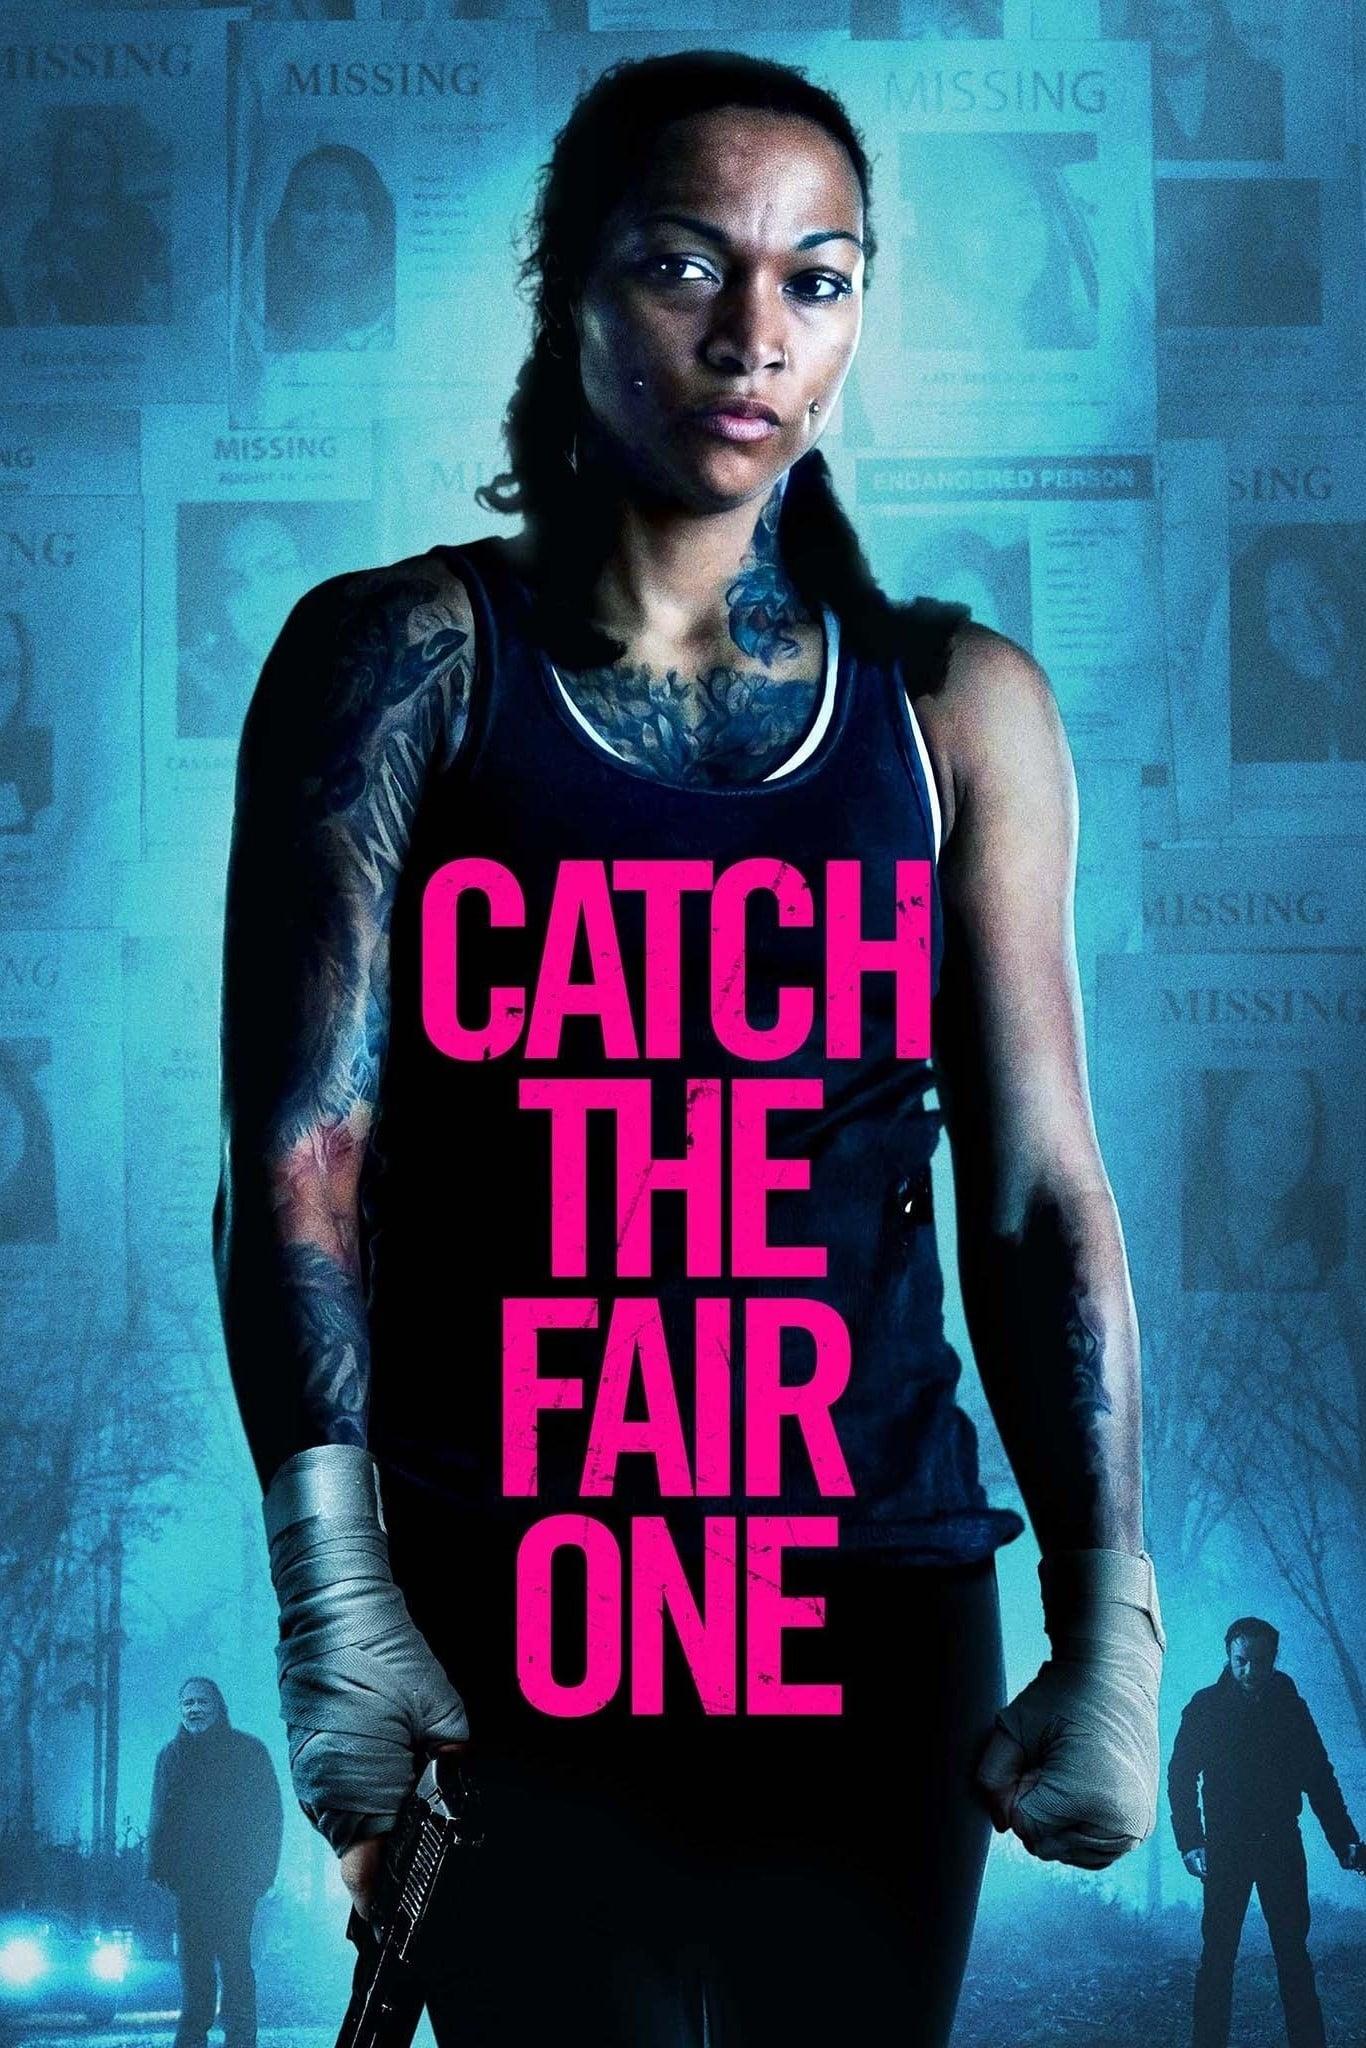 Catch the Fair One poster